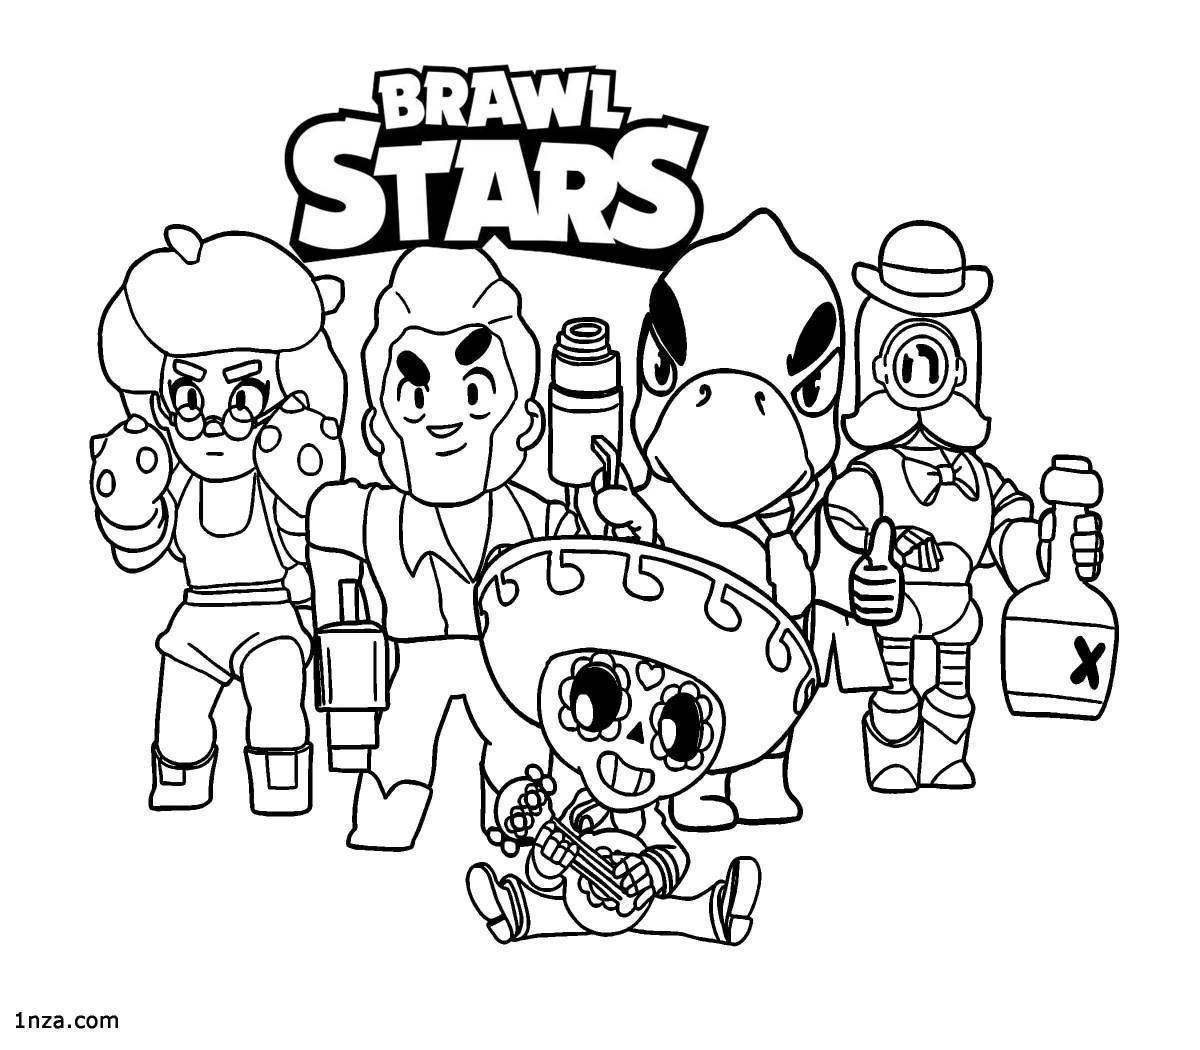 Colorful bravo stars feng coloring page